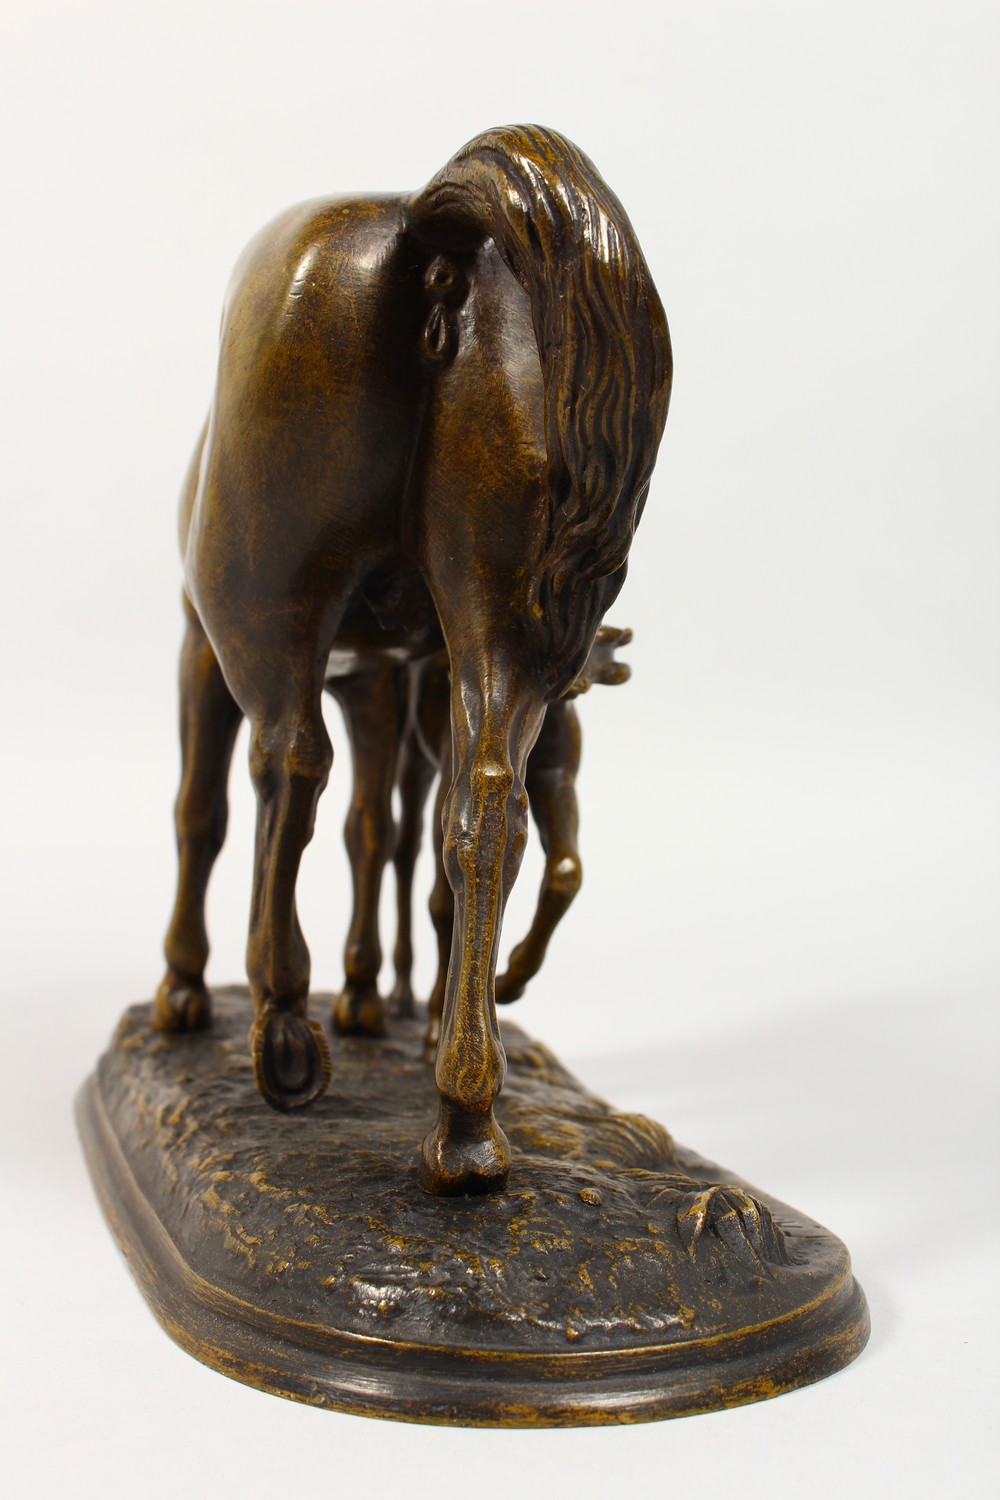 C. FRATIN (1800-1864) FRENCH A bronze mare and foal. Signed FRATIN. 10ins long x 7ins high. - Image 6 of 13